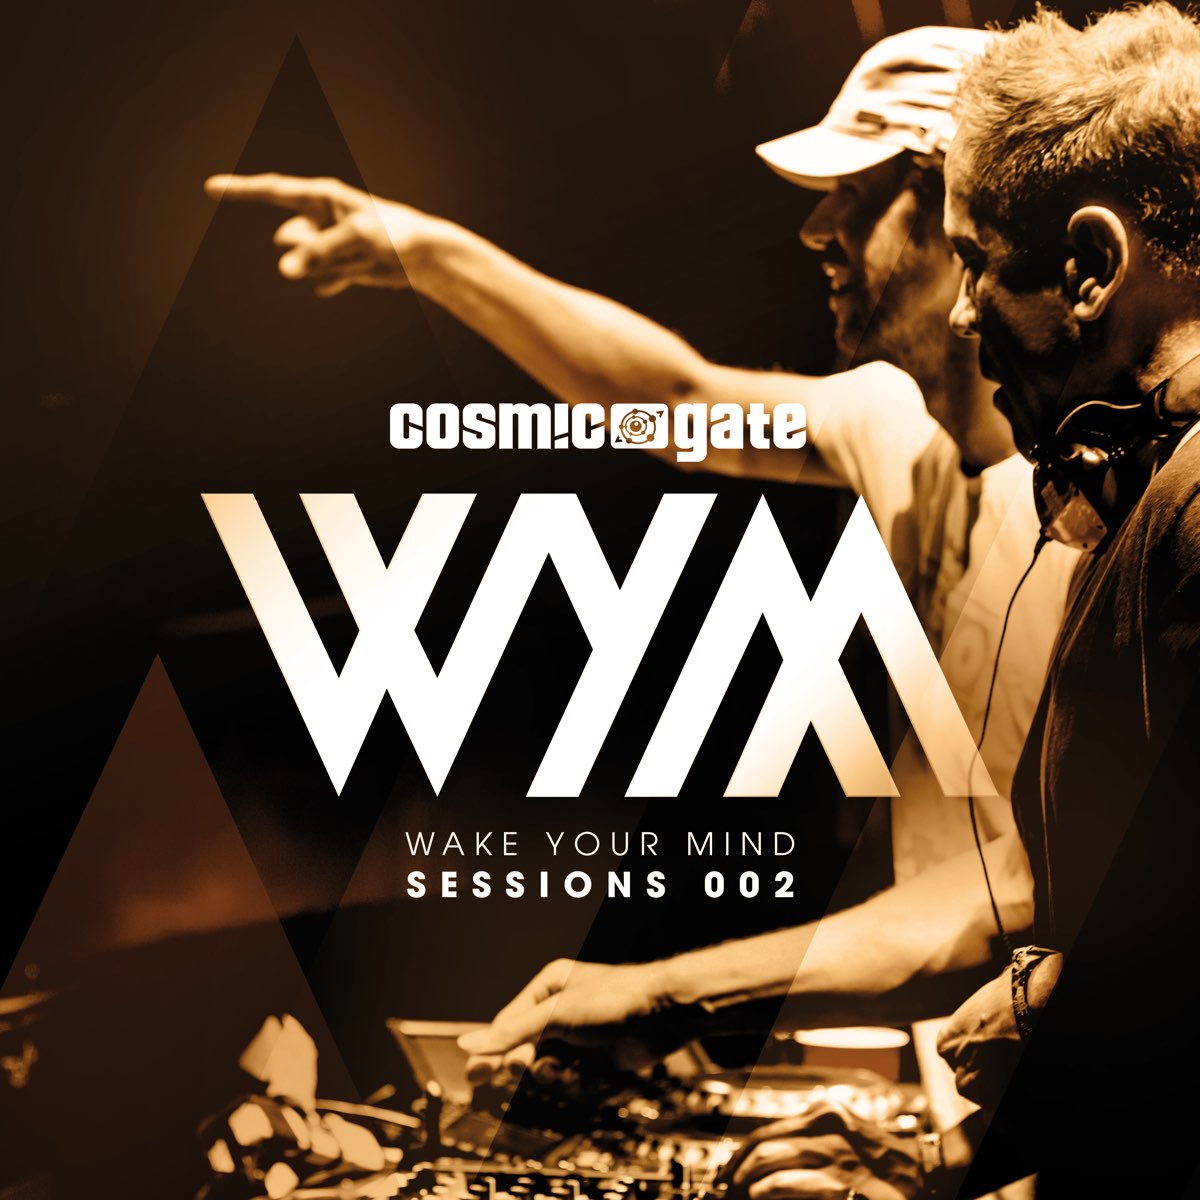 Wake Your Mind Sessions 002 by Cosmic Gate on Apple Music